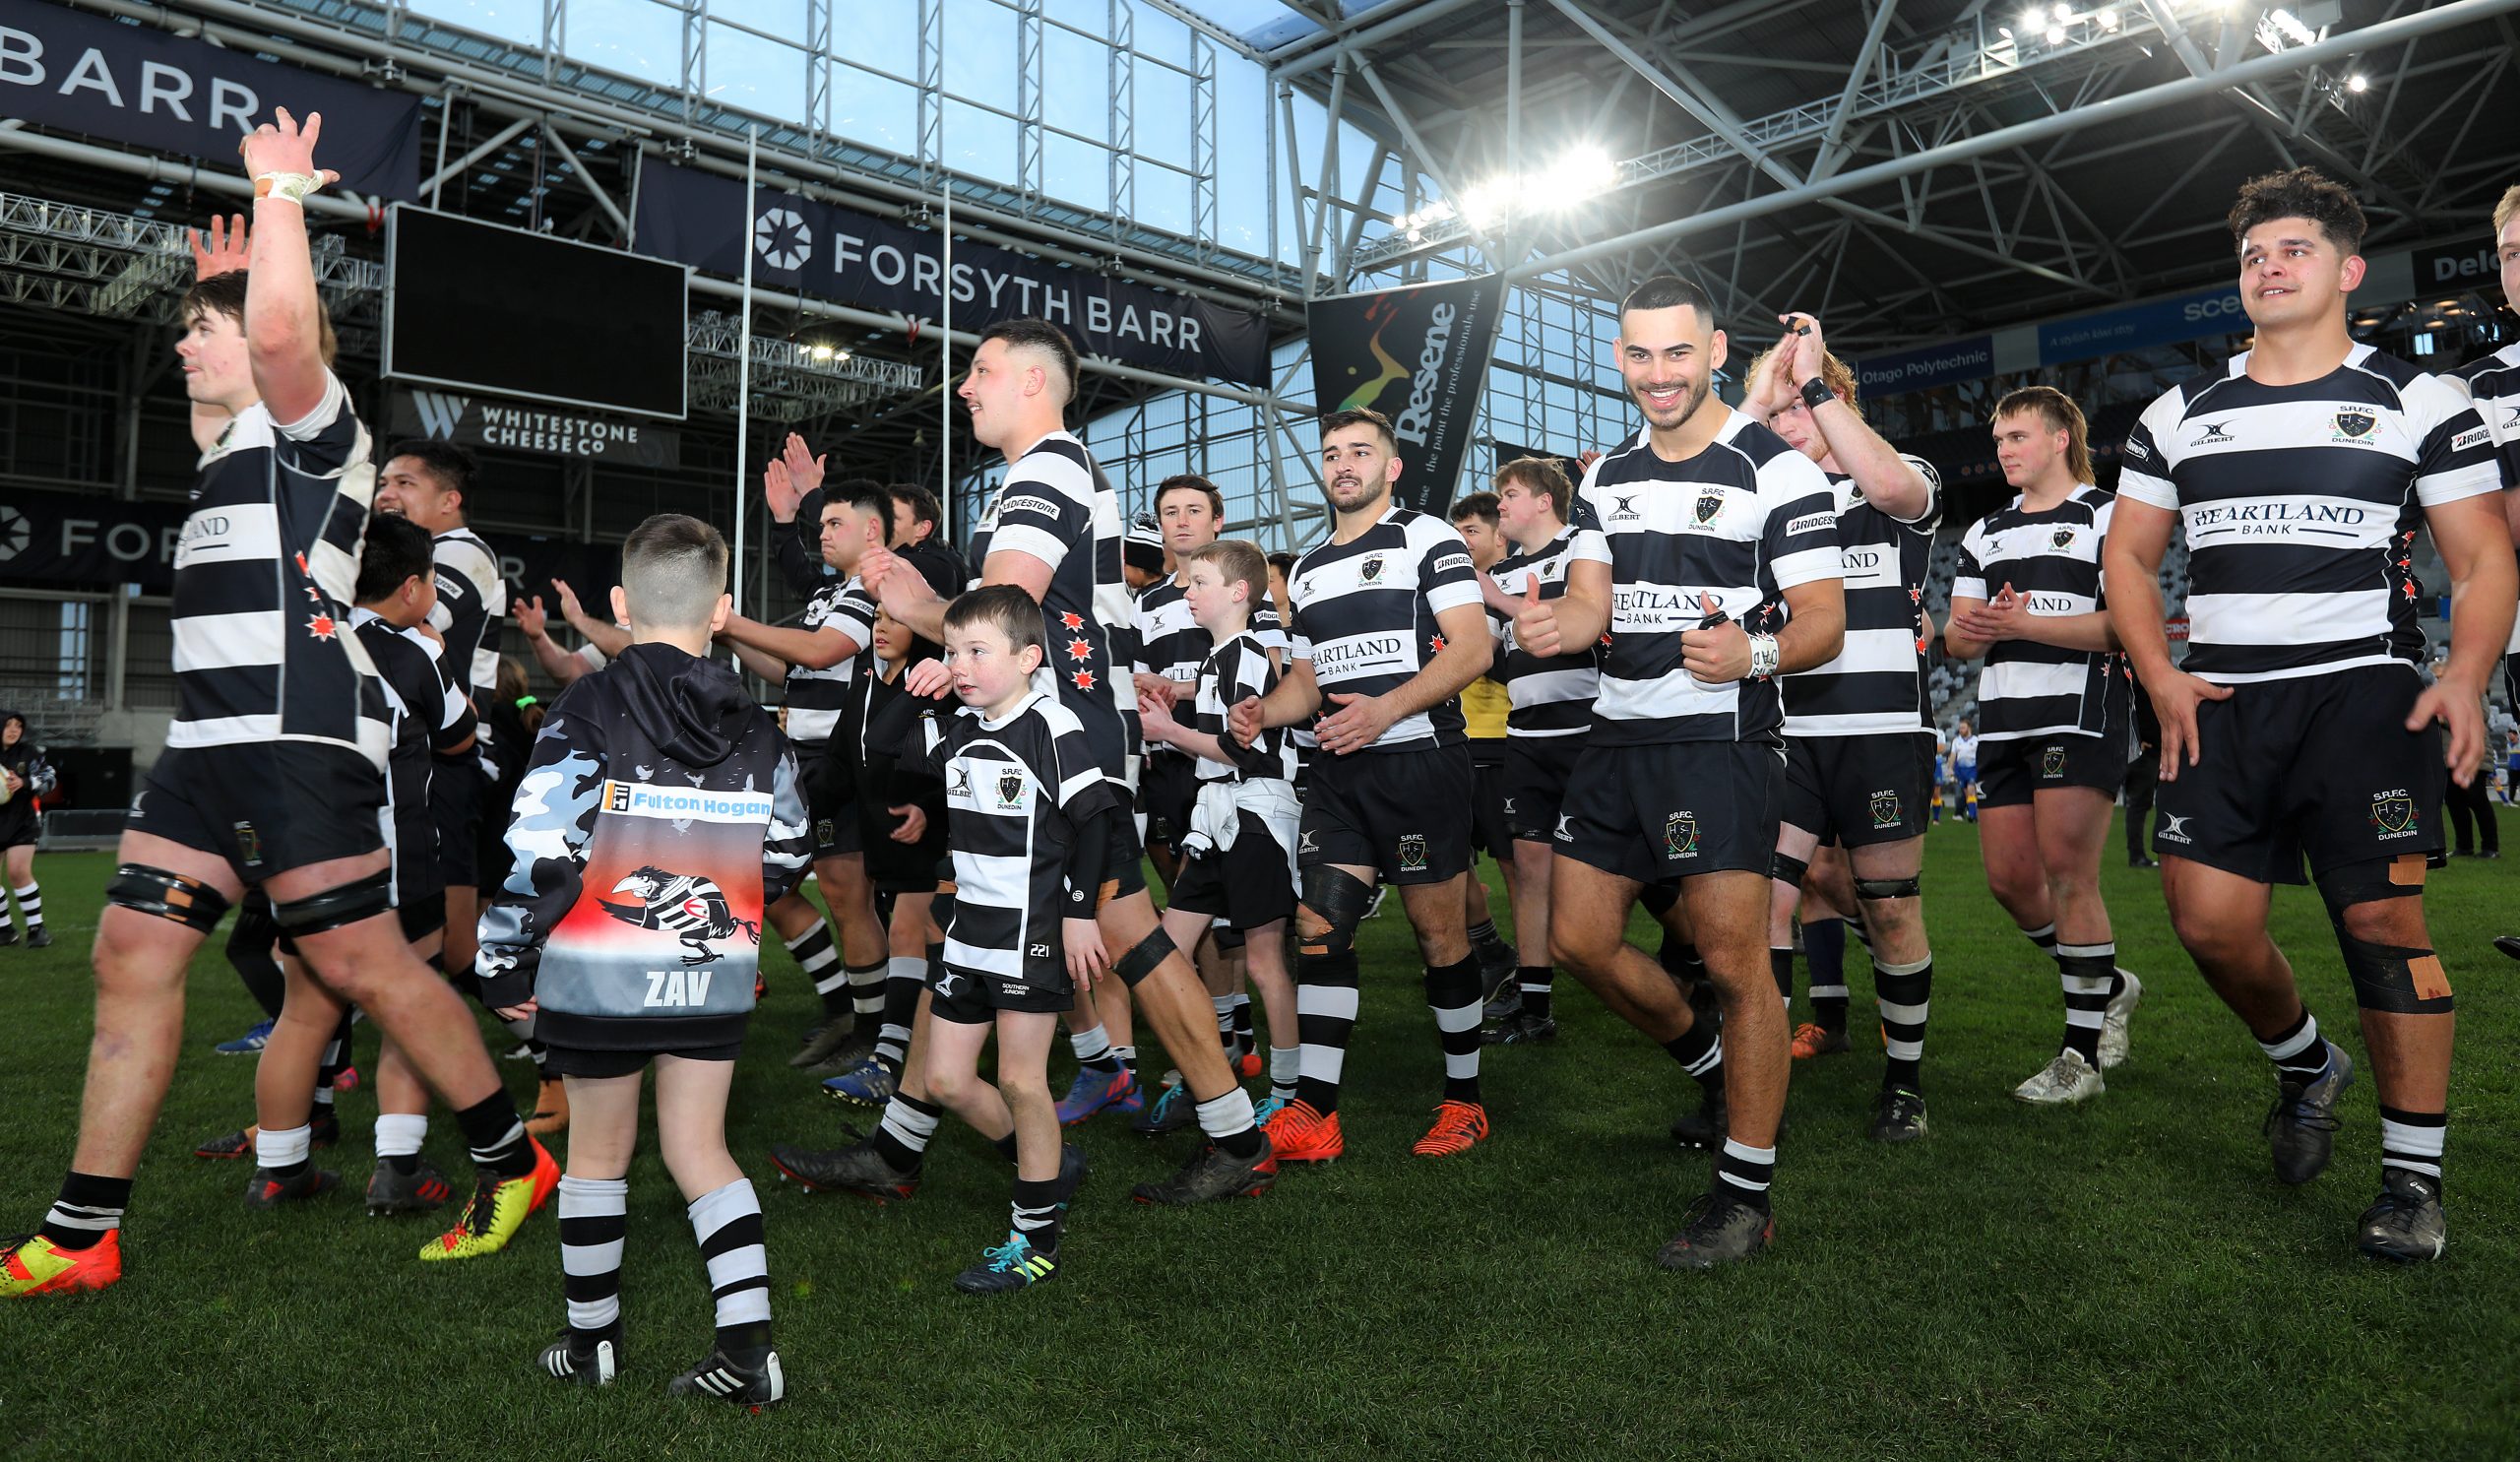 The Southern side after winning the Premier Club Final between Taieri and Southern played at Forsyth Barr Stadium in Dunedin on Saturday 16th July, 2022. © John Caswell / Caswell Images Sport / https://tapebootsandbeer.com/